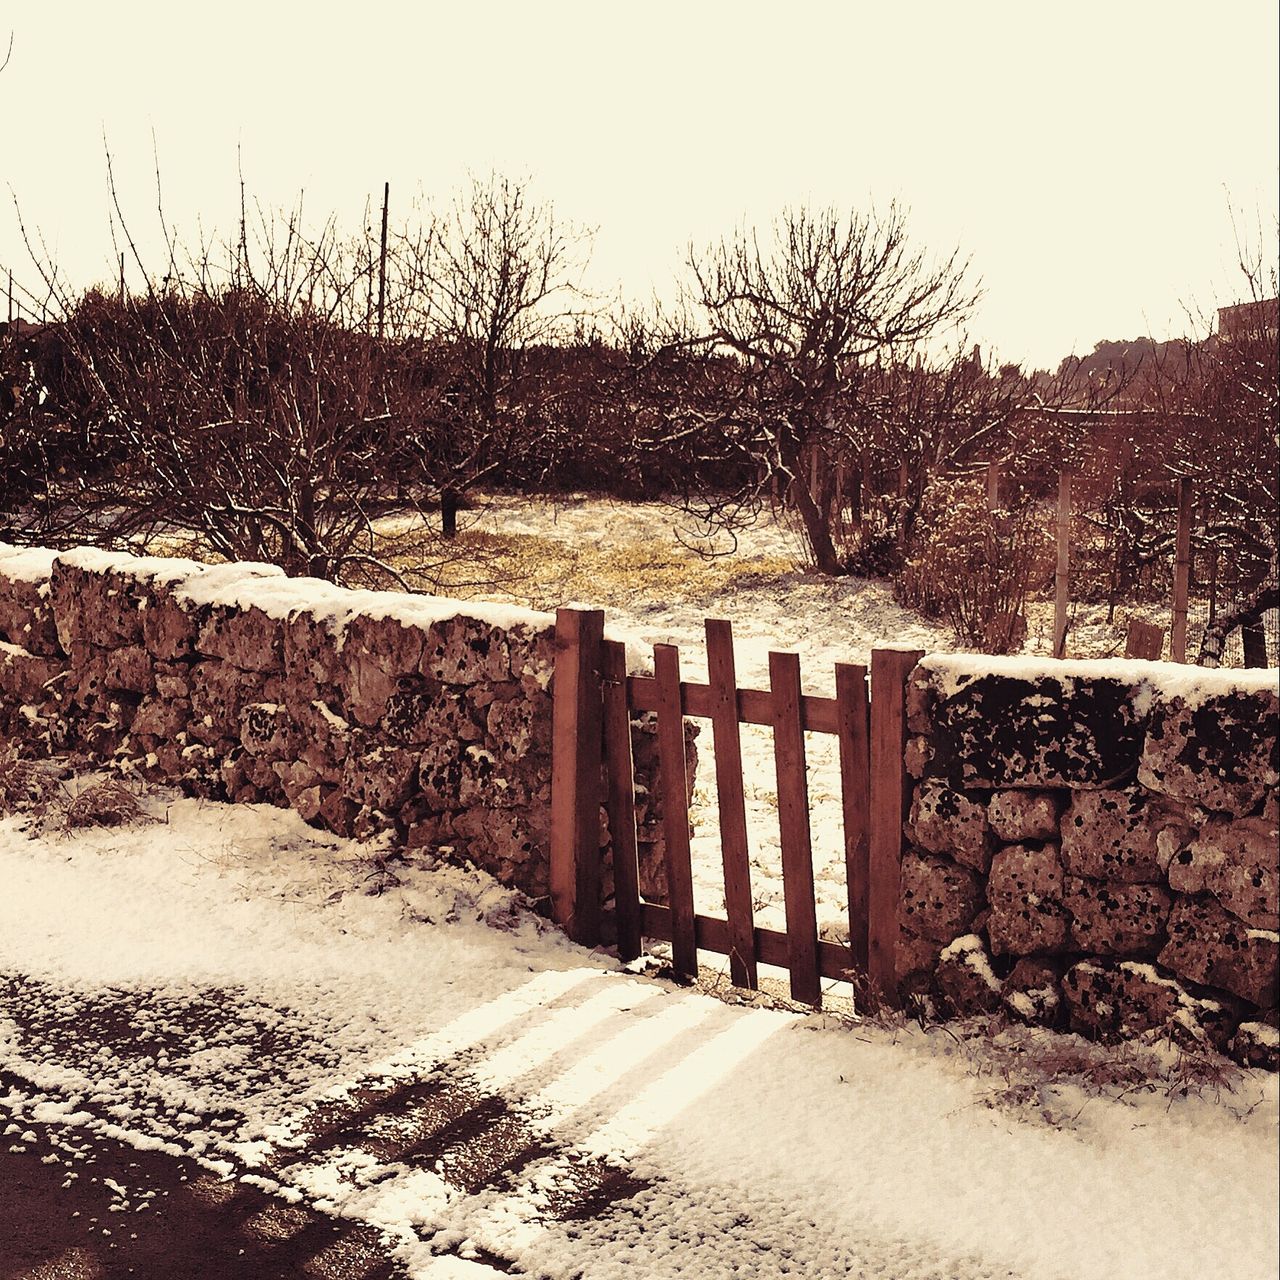 Small wooden gate at stone walls